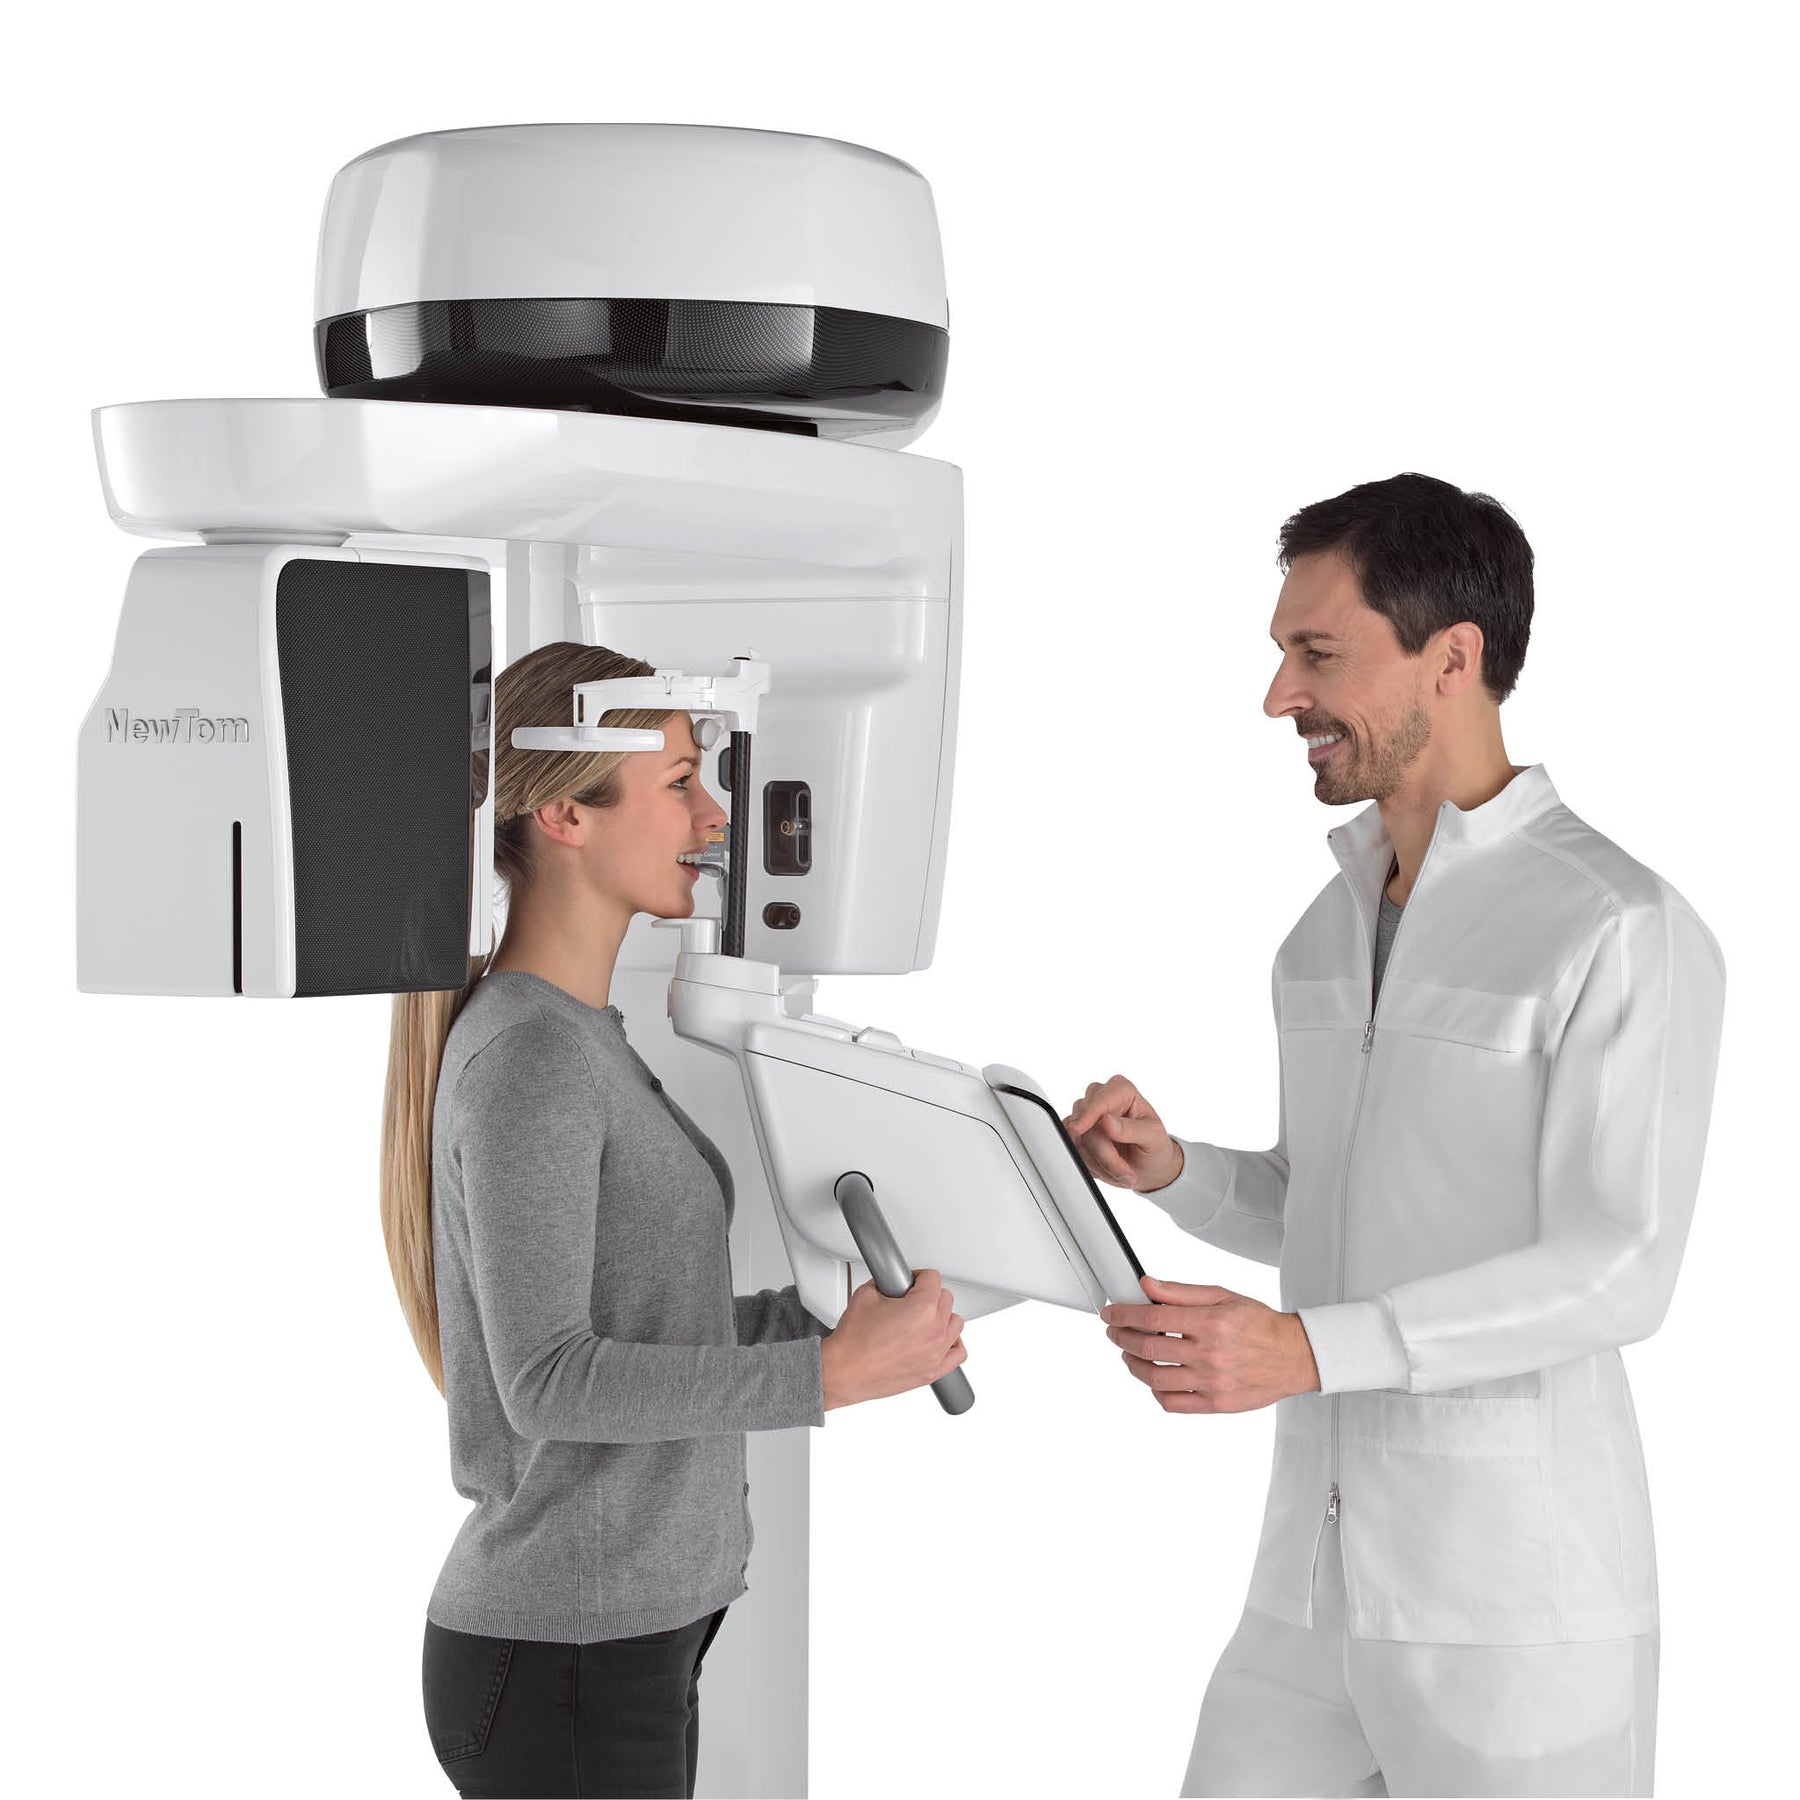 NewTom GiANO HR DC. Low-dose protocols, SafeBeam technology and servo-assisted alignment maximise patient protection.